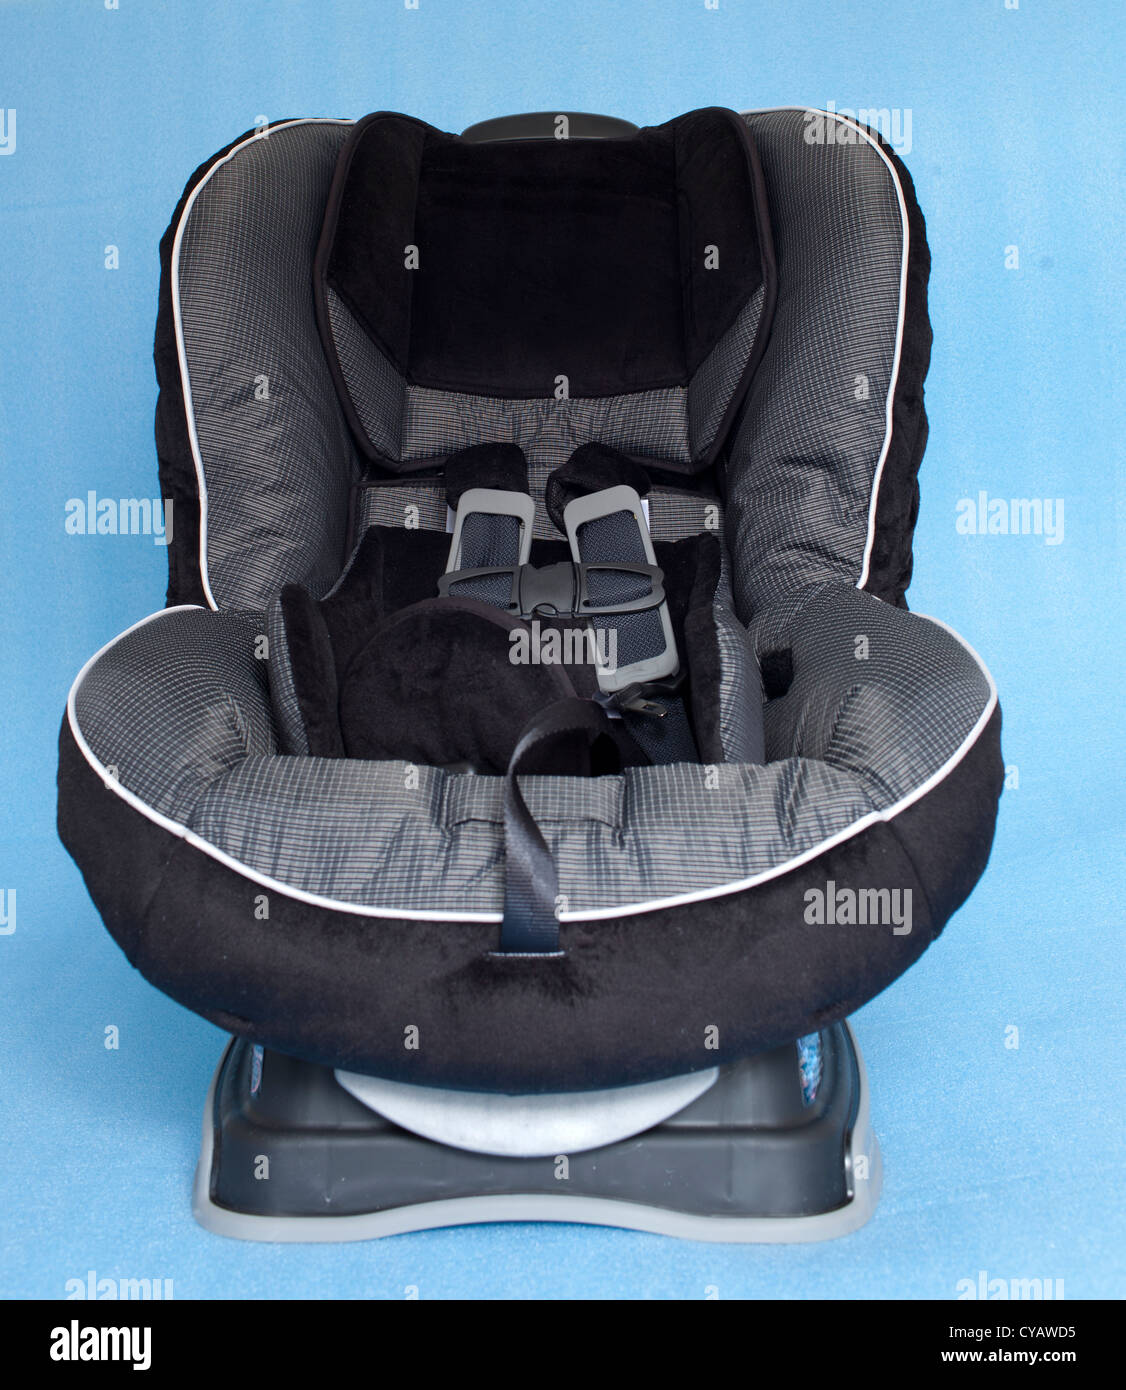 A child's car seat isolated on the clean background Stock Photo